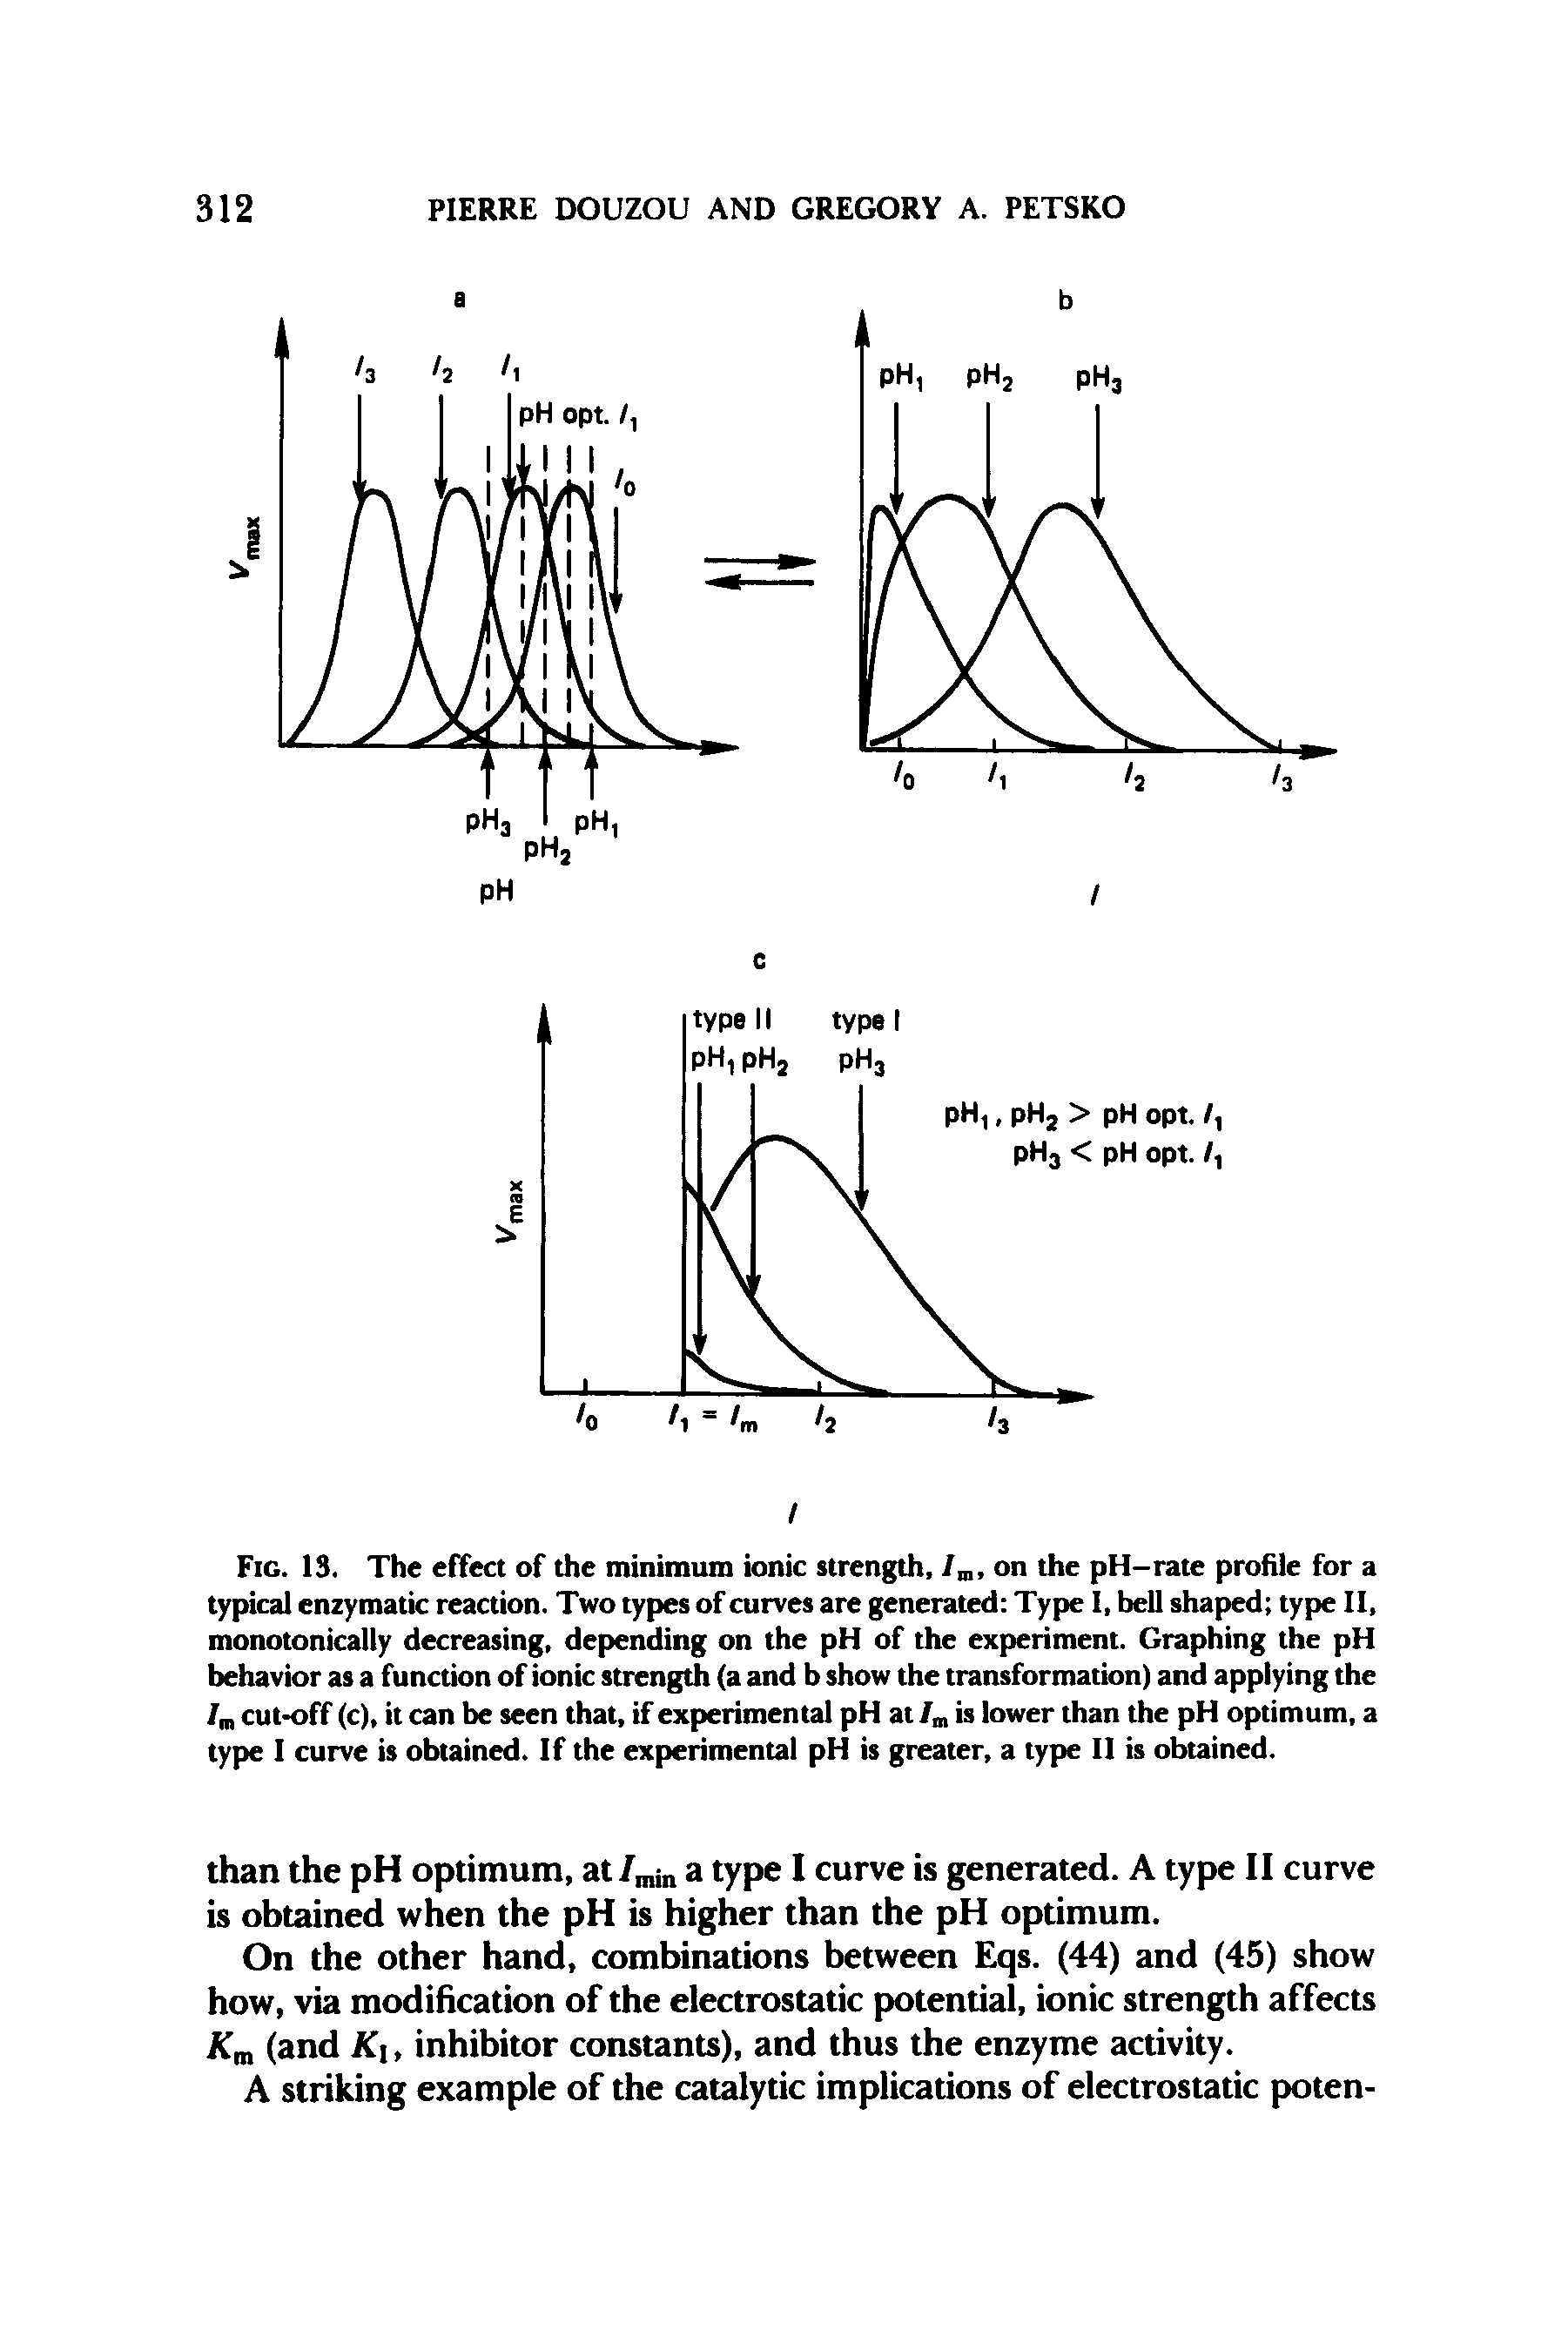 Fig. 13. The effect of the minimum ionic strength, / , on the pH-rate profile for a typical enzymatic reaction. Two types of curves are generated Type I, bell shaped type II, monotonically decreasing, depending on the pH of the experiment. Graphing the pH behavior as a function of ionic strength (a and b show the transformation) and applying the / cut-off (c), it can be seen that, if experimental pH at is lower than the pH optimum, a type I curve is obtained. If the experimental pH is greater, a type II is obtained.